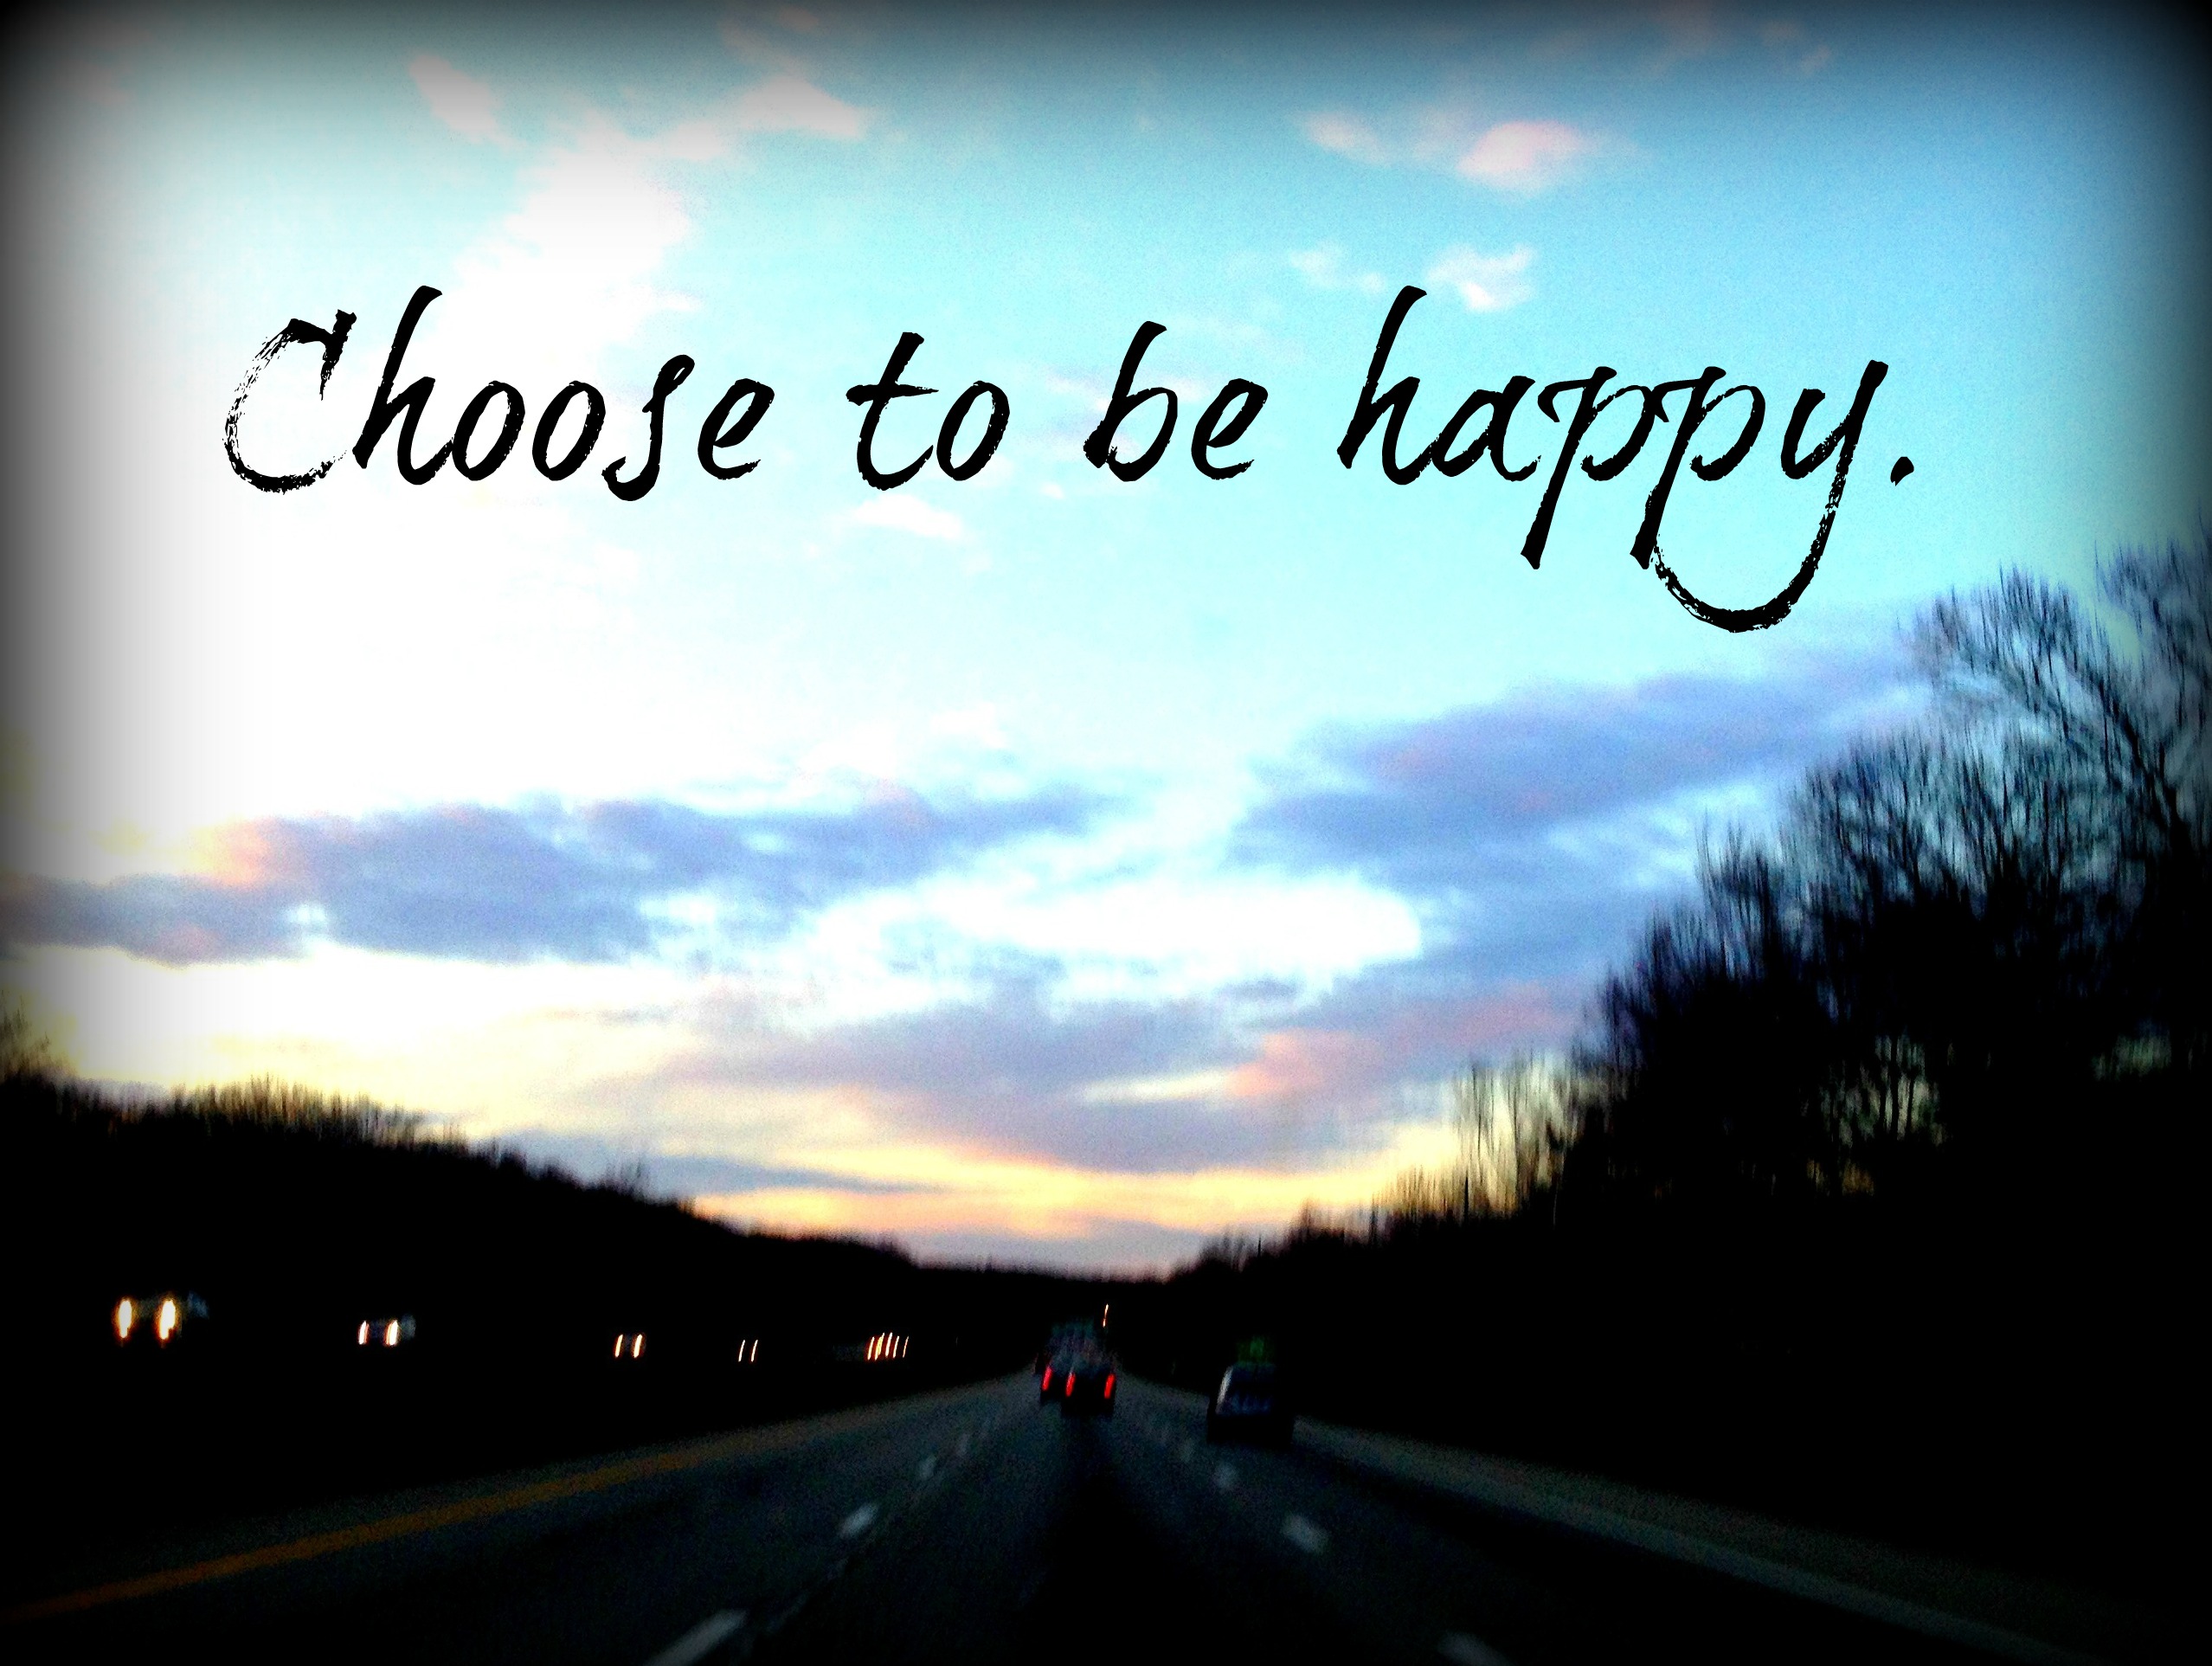 I Choose To Be Happy Quotes. QuotesGram